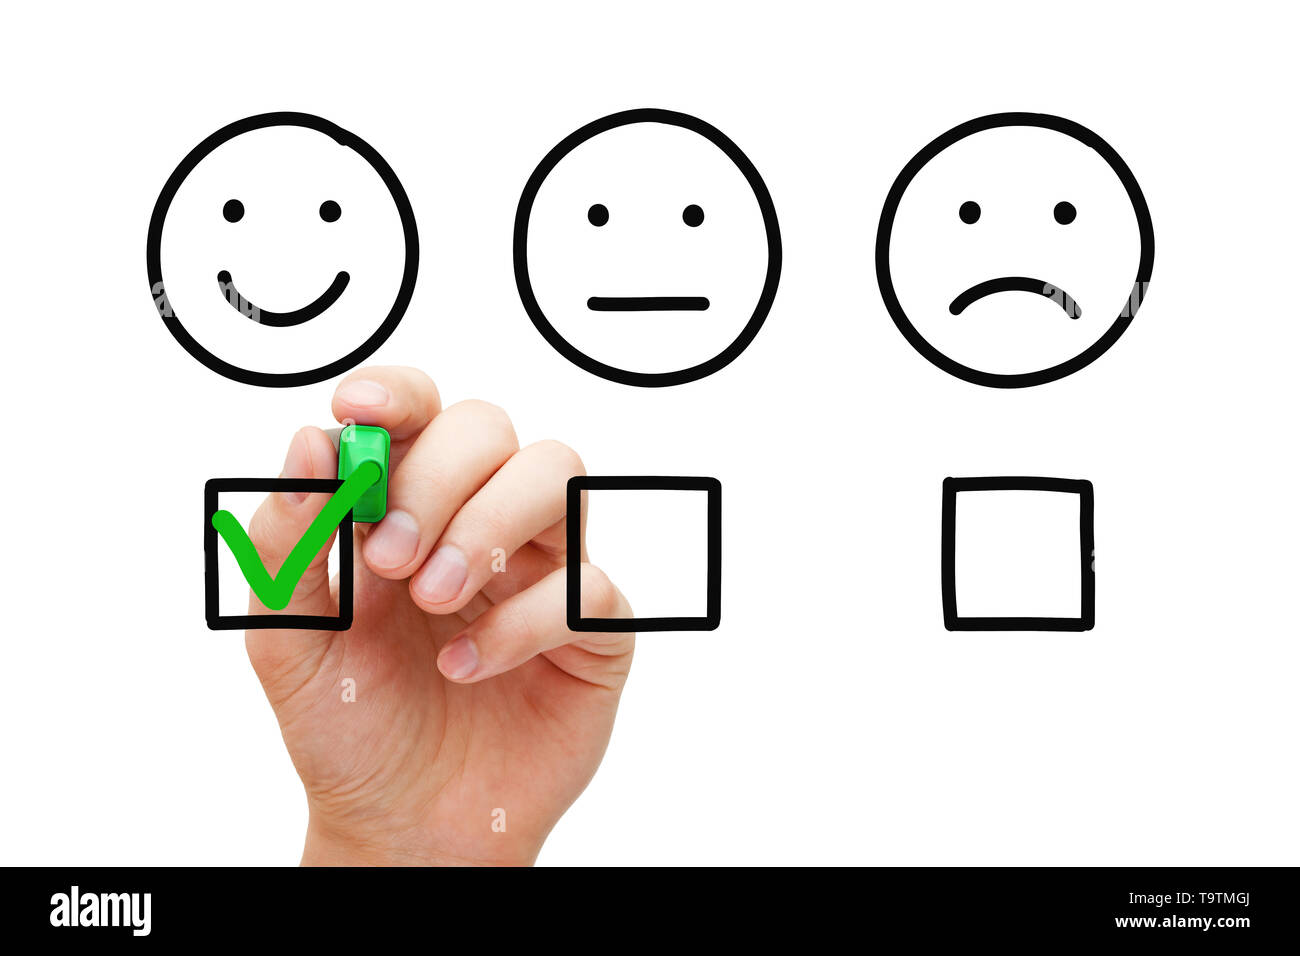 Happy customer evaluating with green marker check mark on feedback survey. Client satisfaction business service concept. Stock Photo